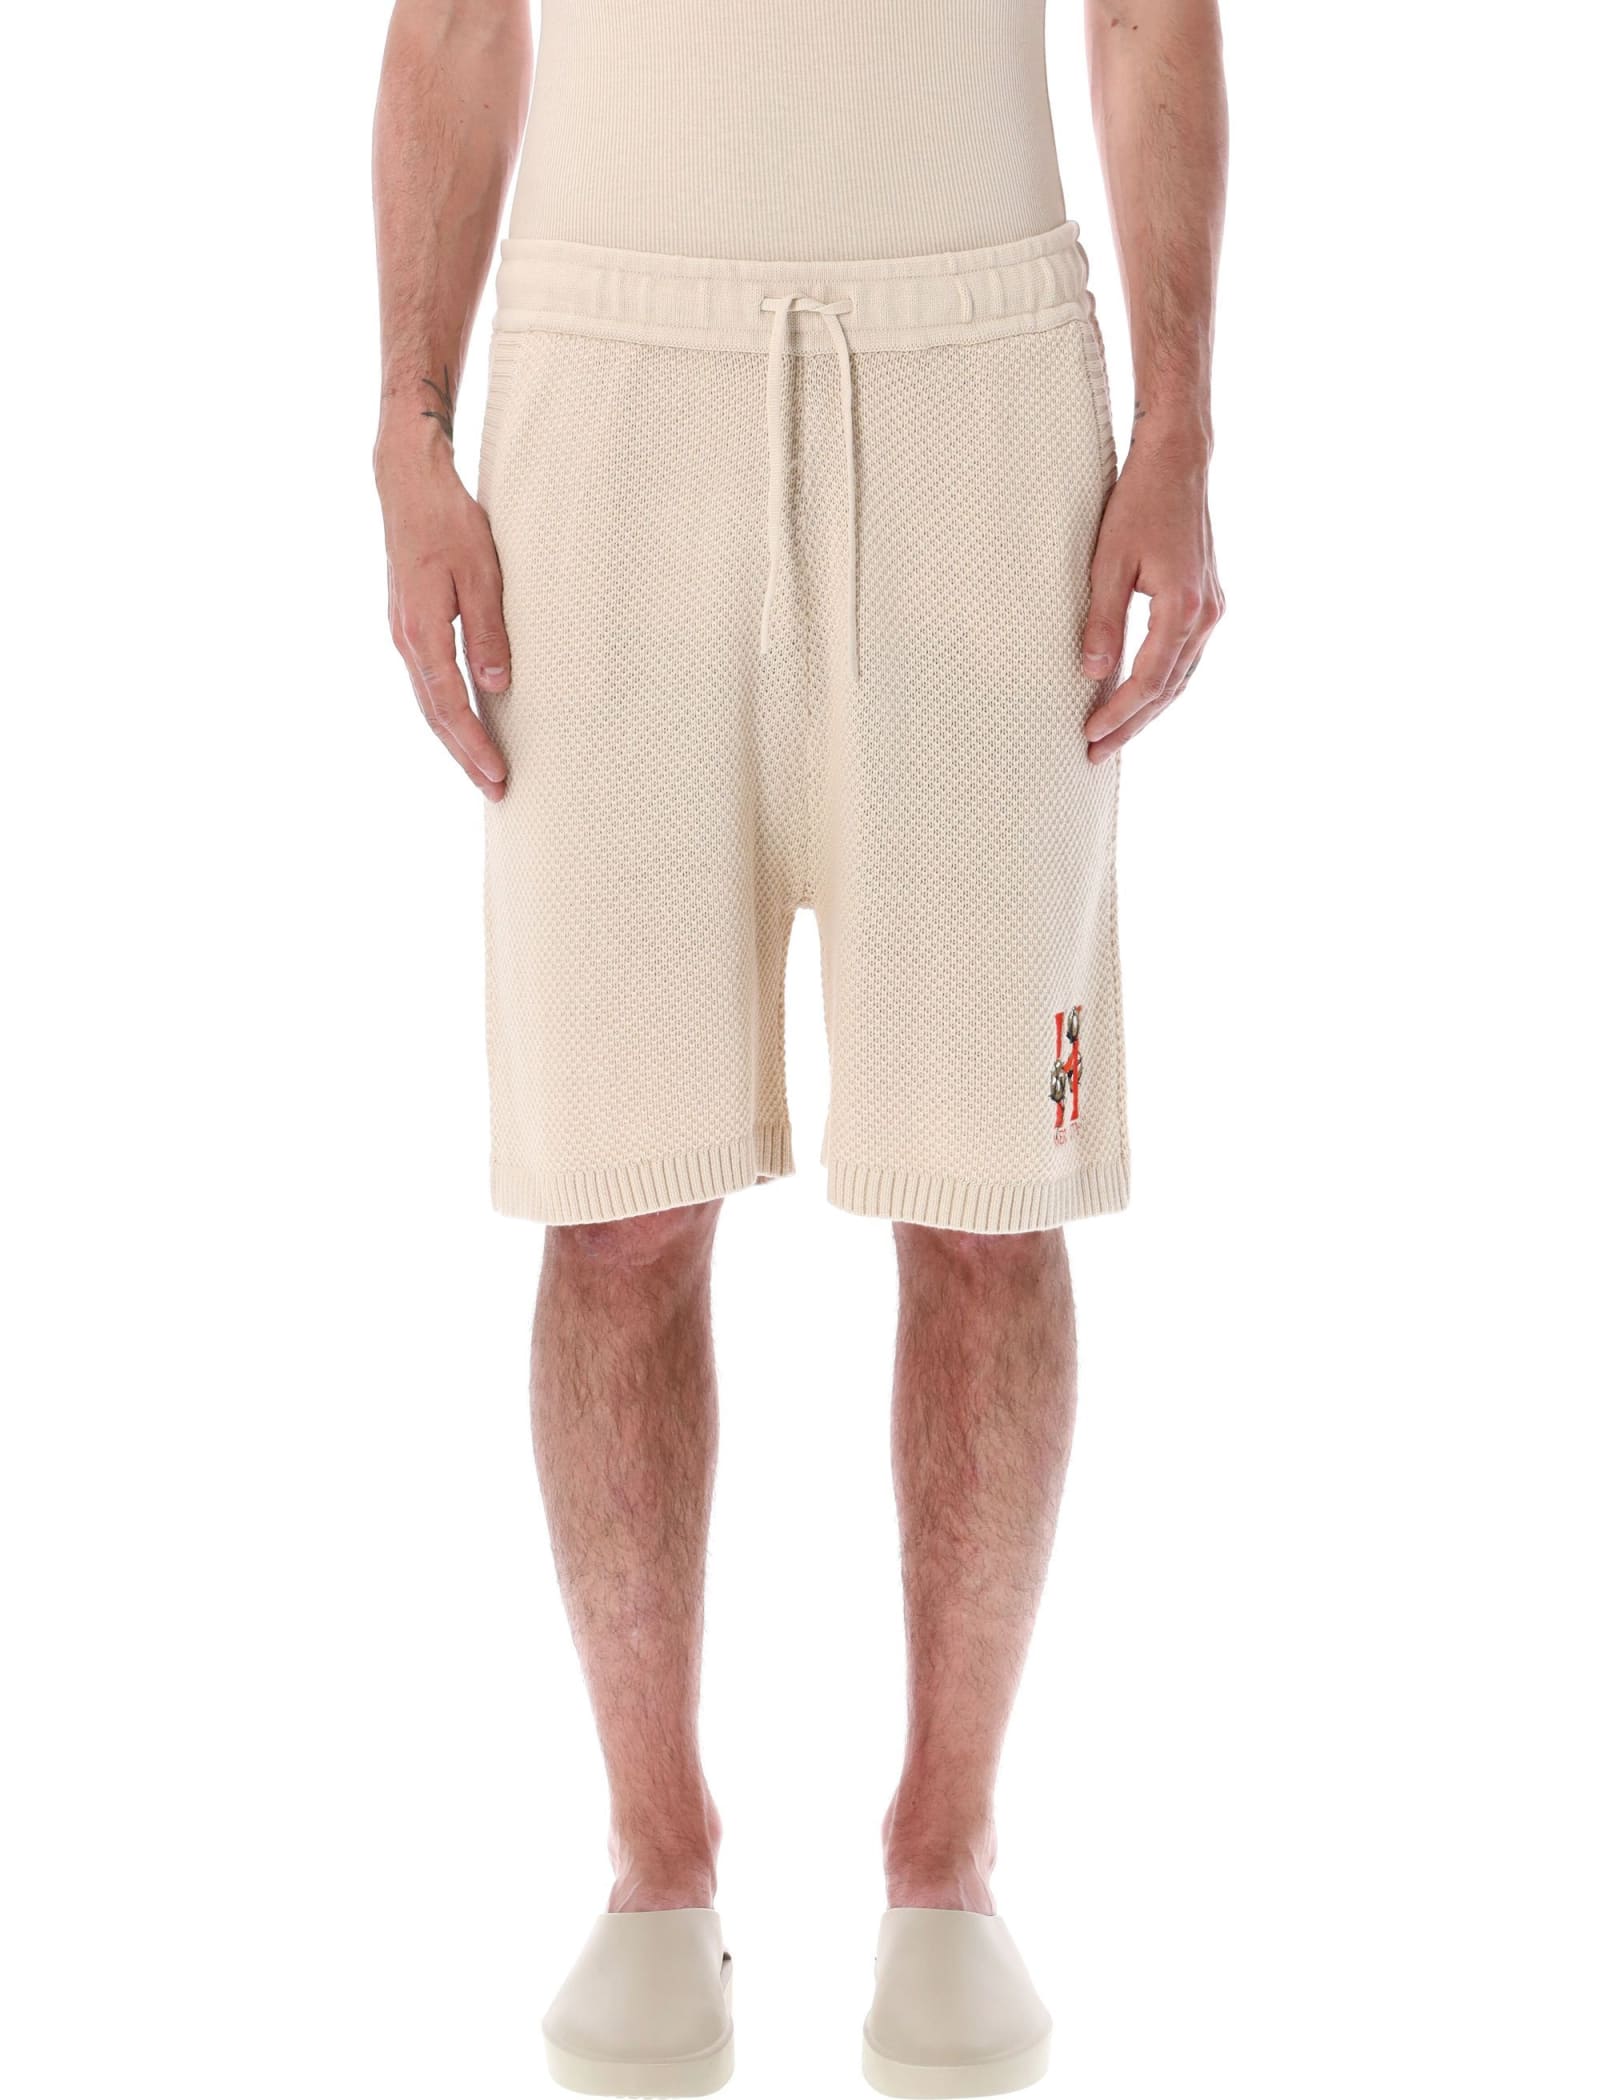 HONOR THE GIFT KNIT H SHORTS